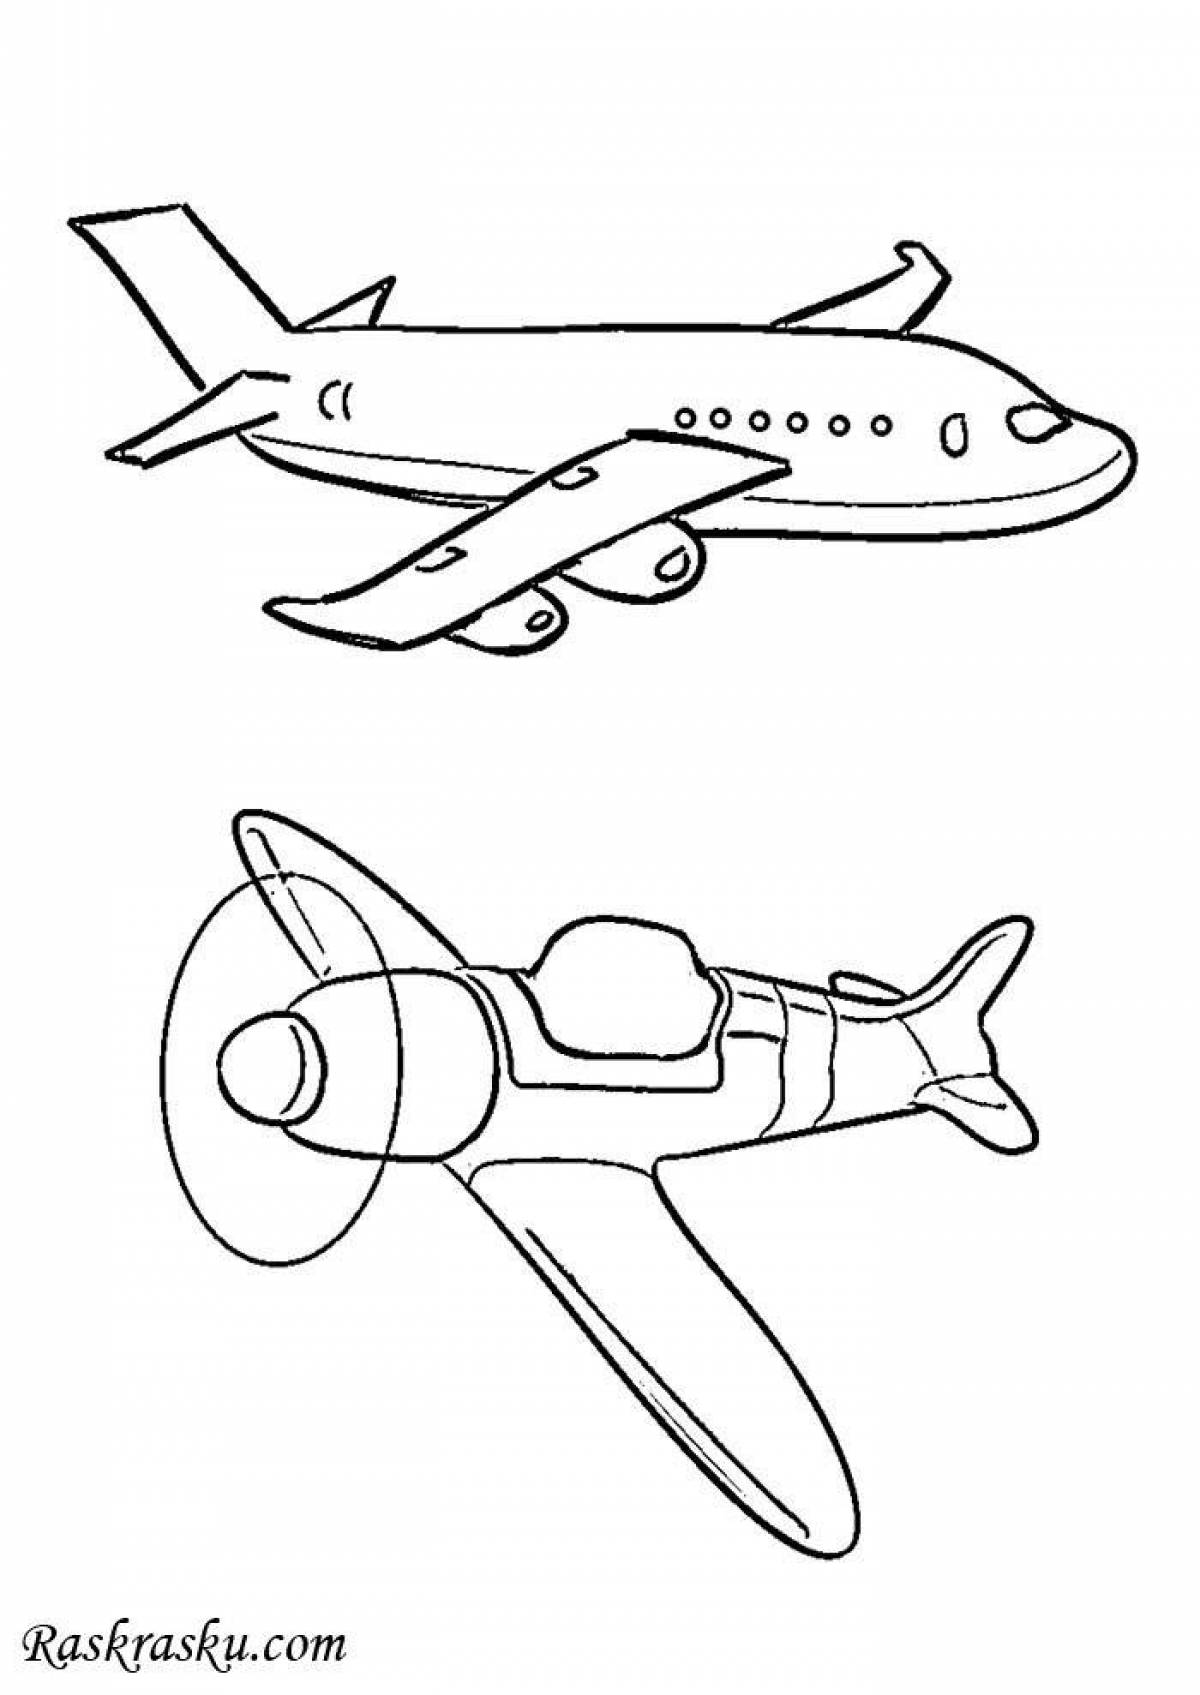 Coloring page elegant plane for boys